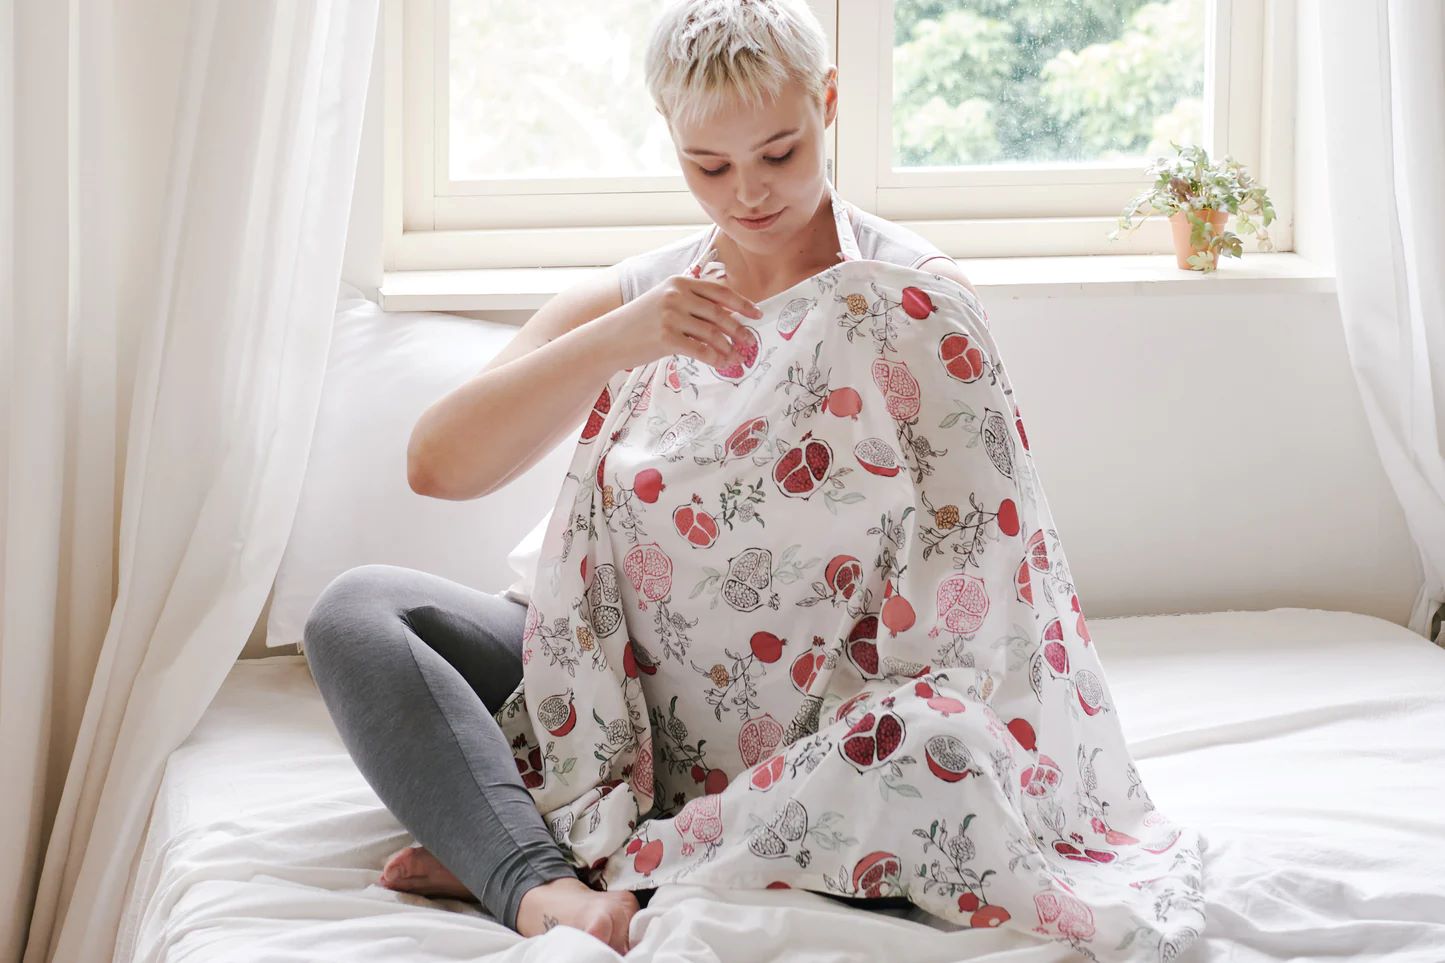 Nursing Cover Review: A Must-Have for New Moms